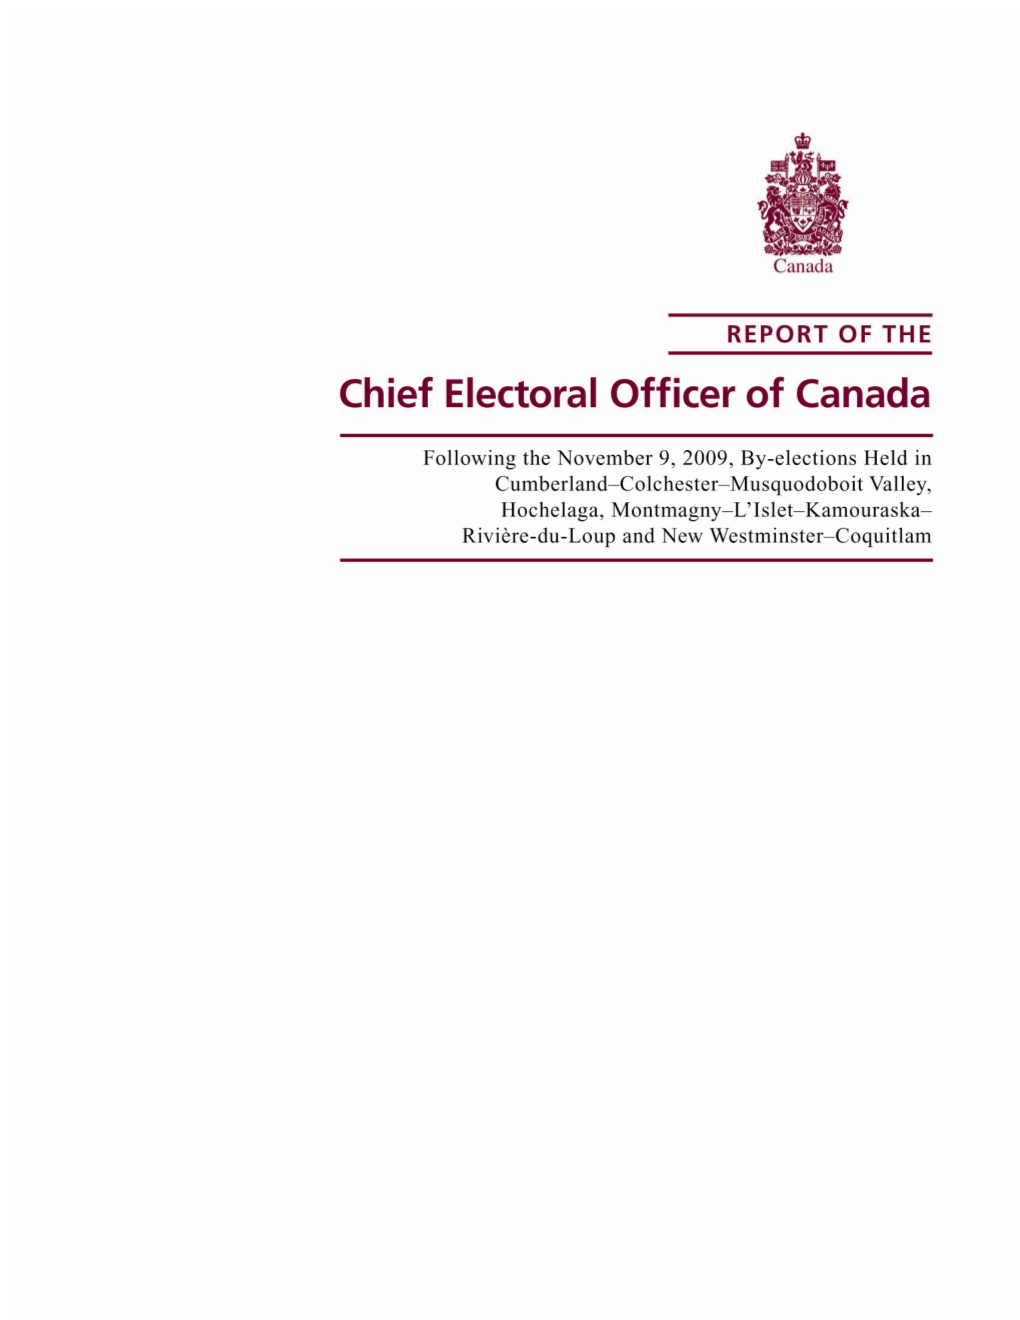 2009 By-Elections Report